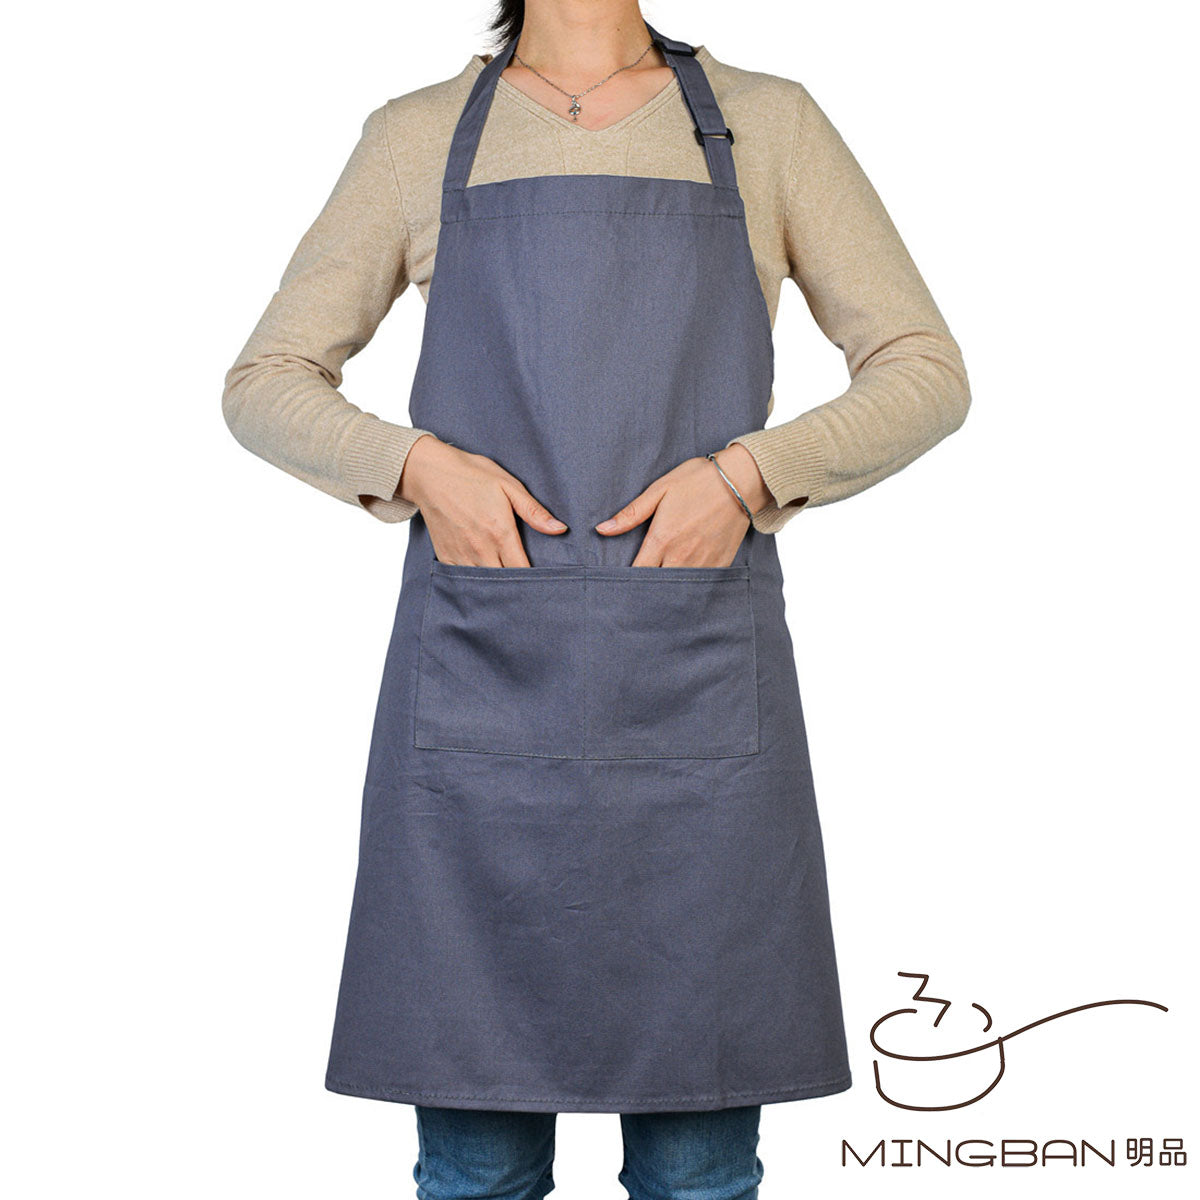 Waterproof, Oil-Proof and Dirt-Resistant Cotton Apron with pocket - Gray